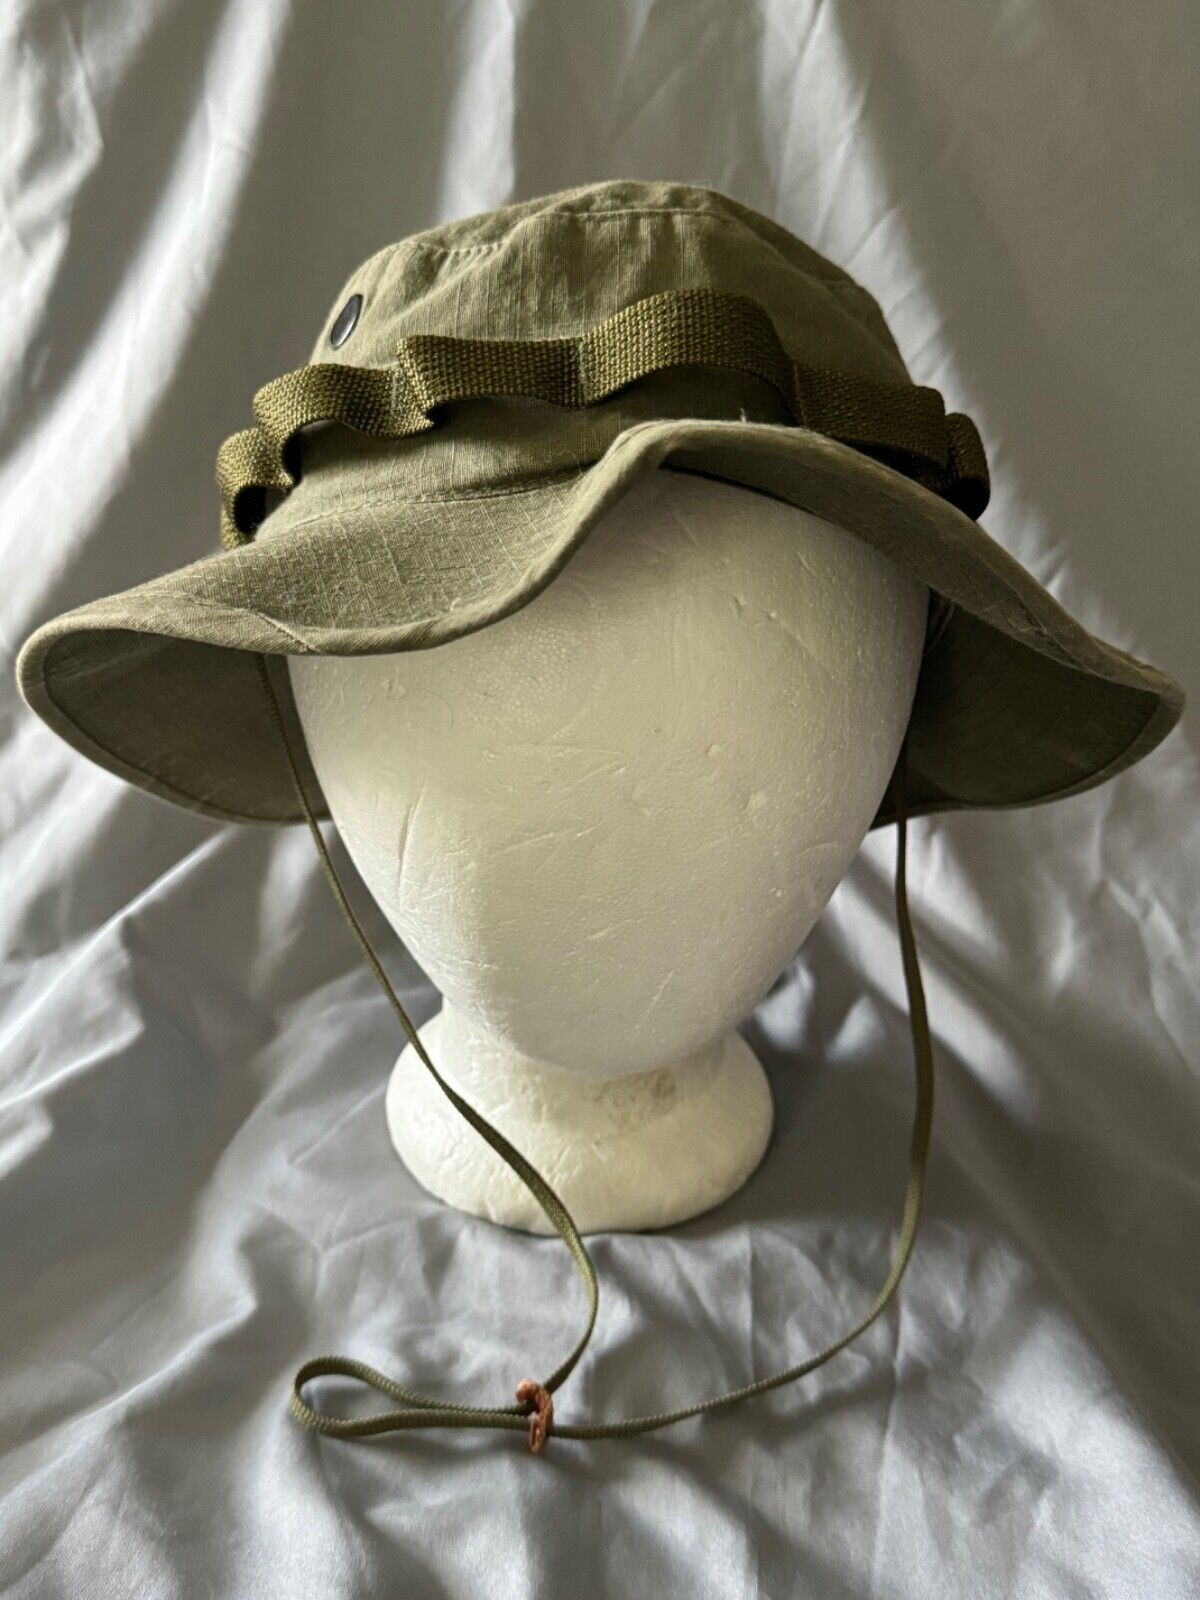 NEW 7 OLIVE GREEN US MILITARY HOT WEATHER SUN HAT TYPE II MIL-SPEC-H-43577